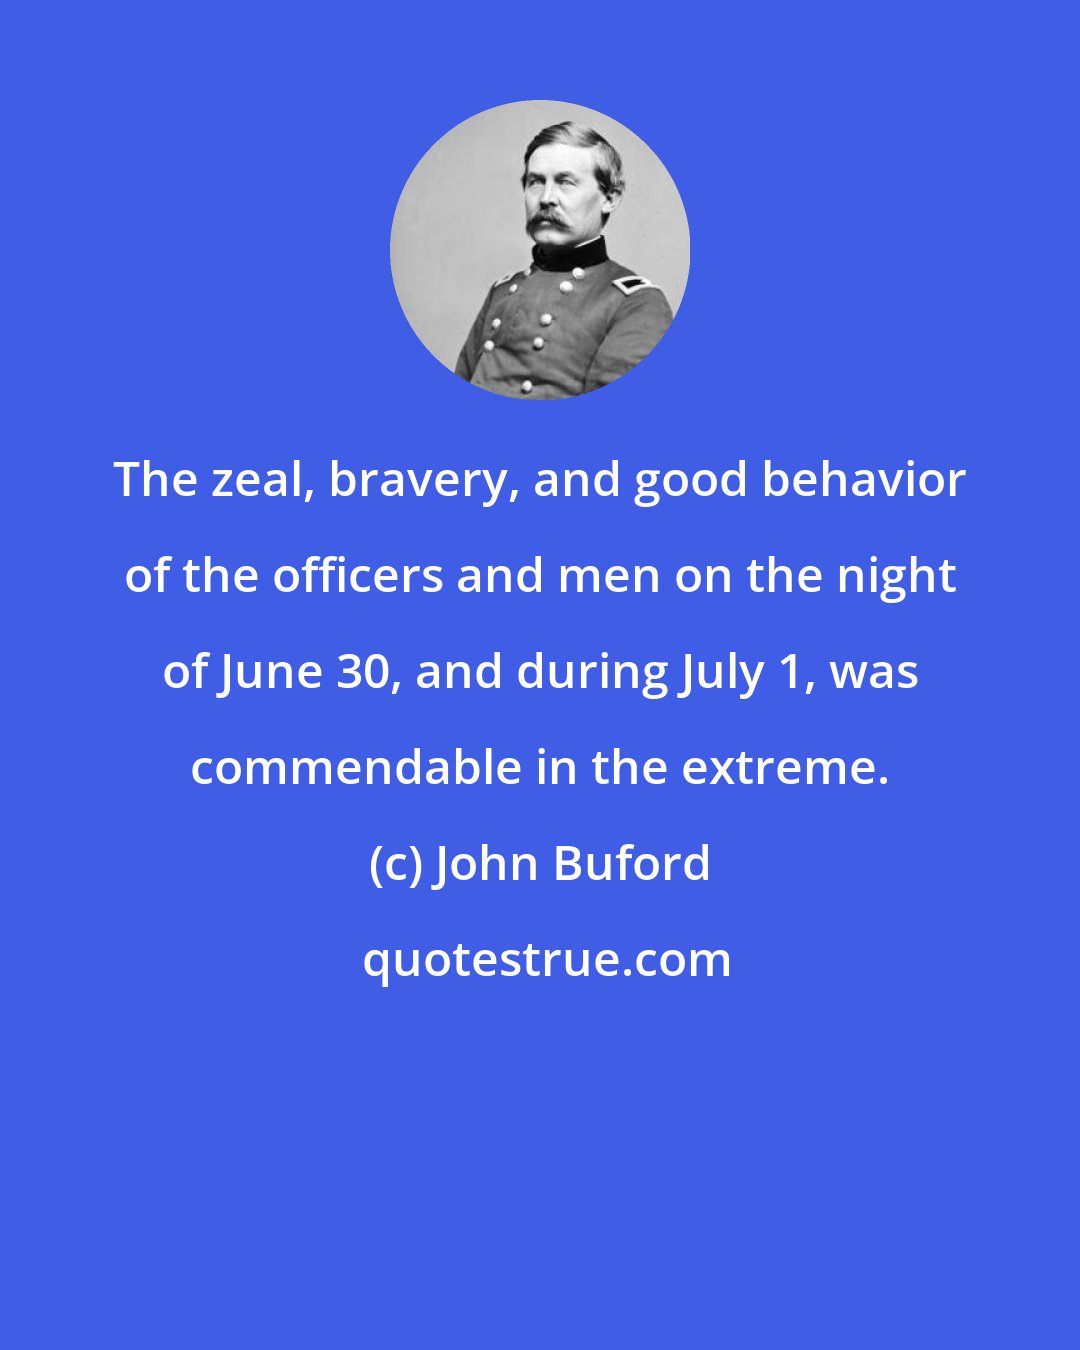 John Buford: The zeal, bravery, and good behavior of the officers and men on the night of June 30, and during July 1, was commendable in the extreme.